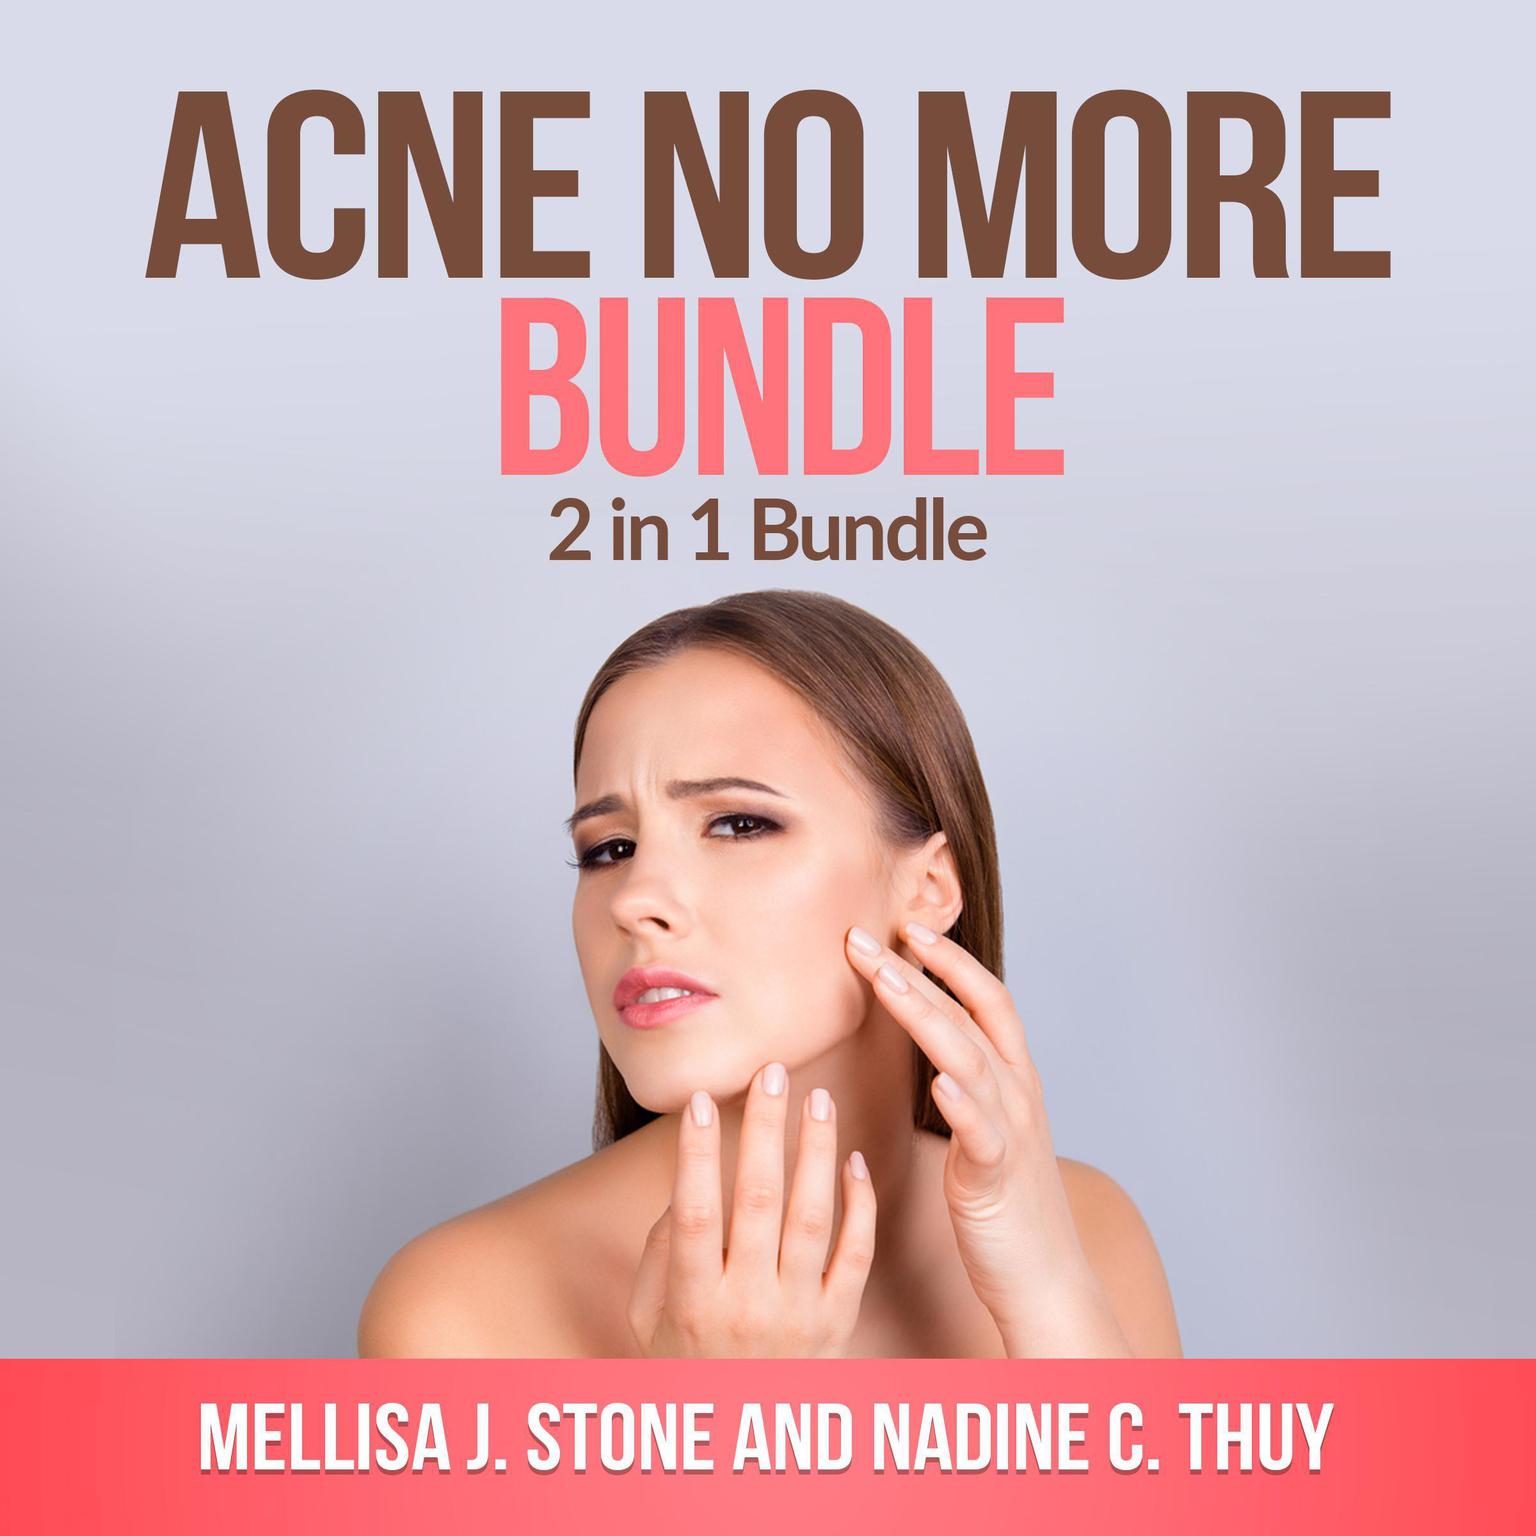 Acne no more Bundle: 2 in 1 Bundle, Acne, Acne Treatment for Teens Audiobook, by Mellisa J. Stone